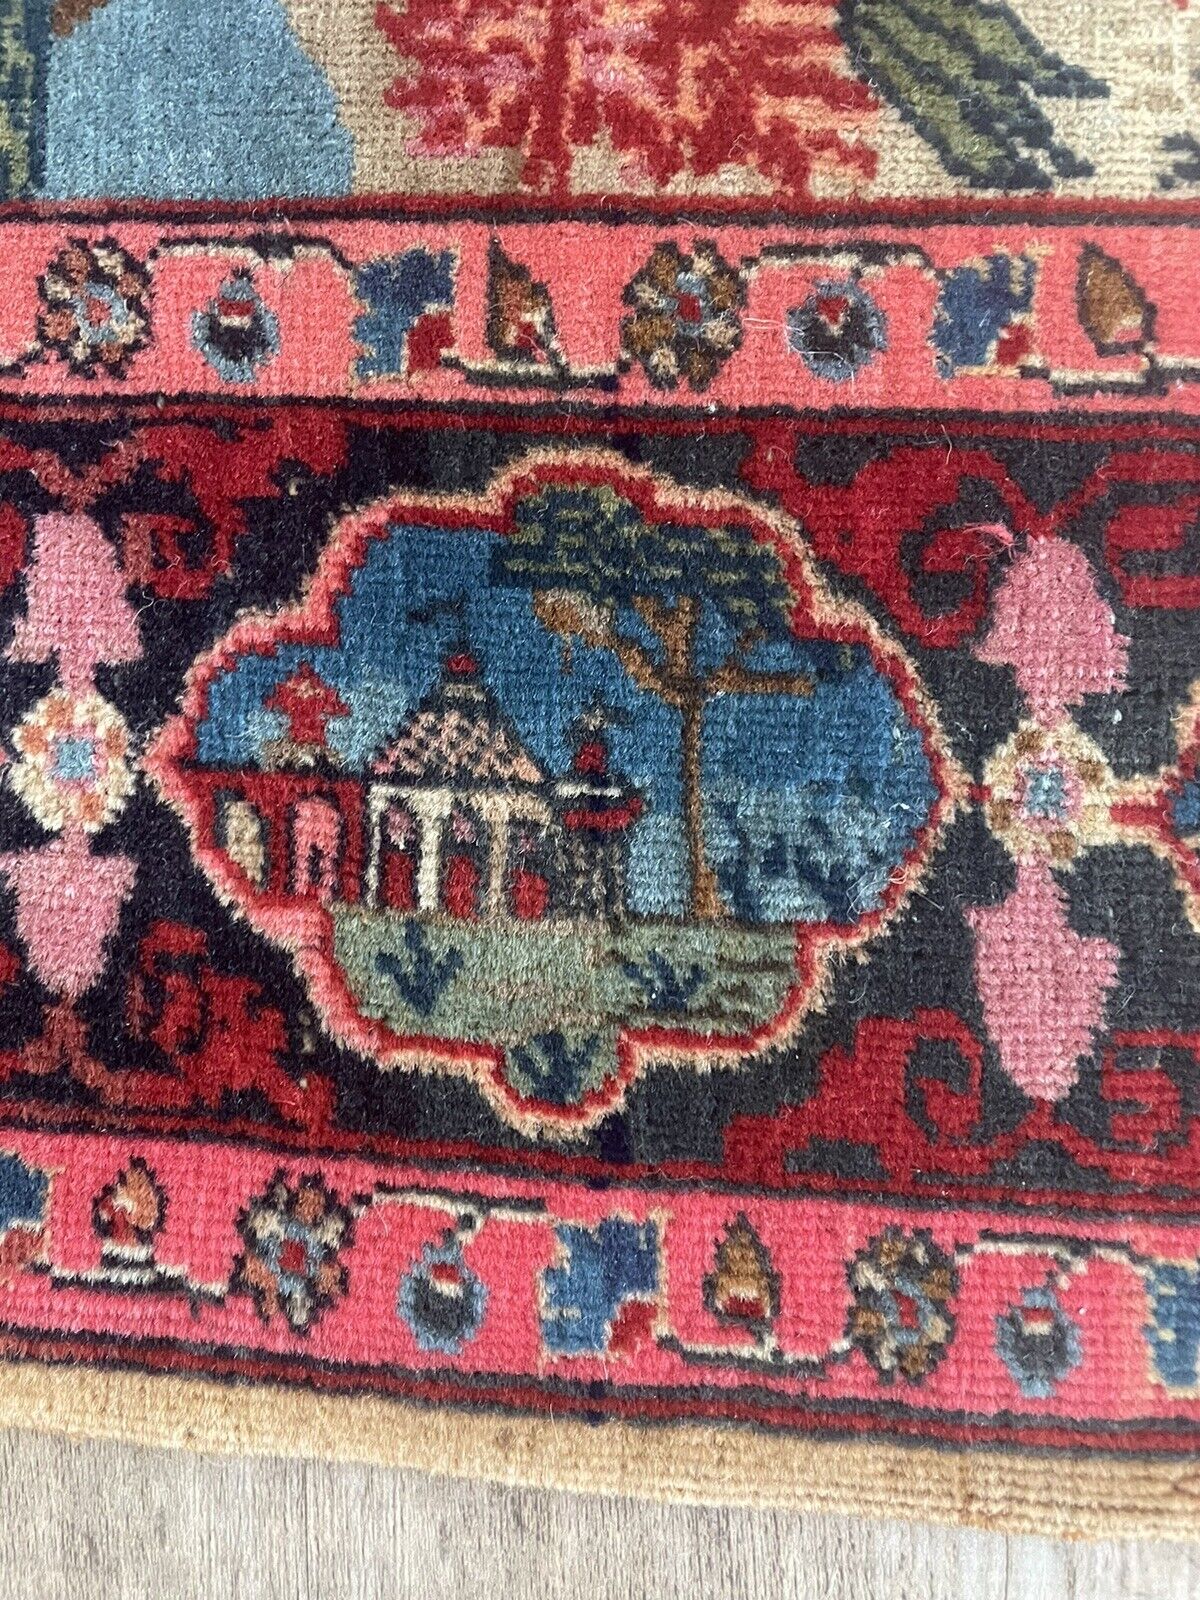 Close-up of allure on Handmade Antique Persian Kashan Collectible Rug - Detailed view showcasing the rug's allure and beauty, making it a prized addition to any collection.